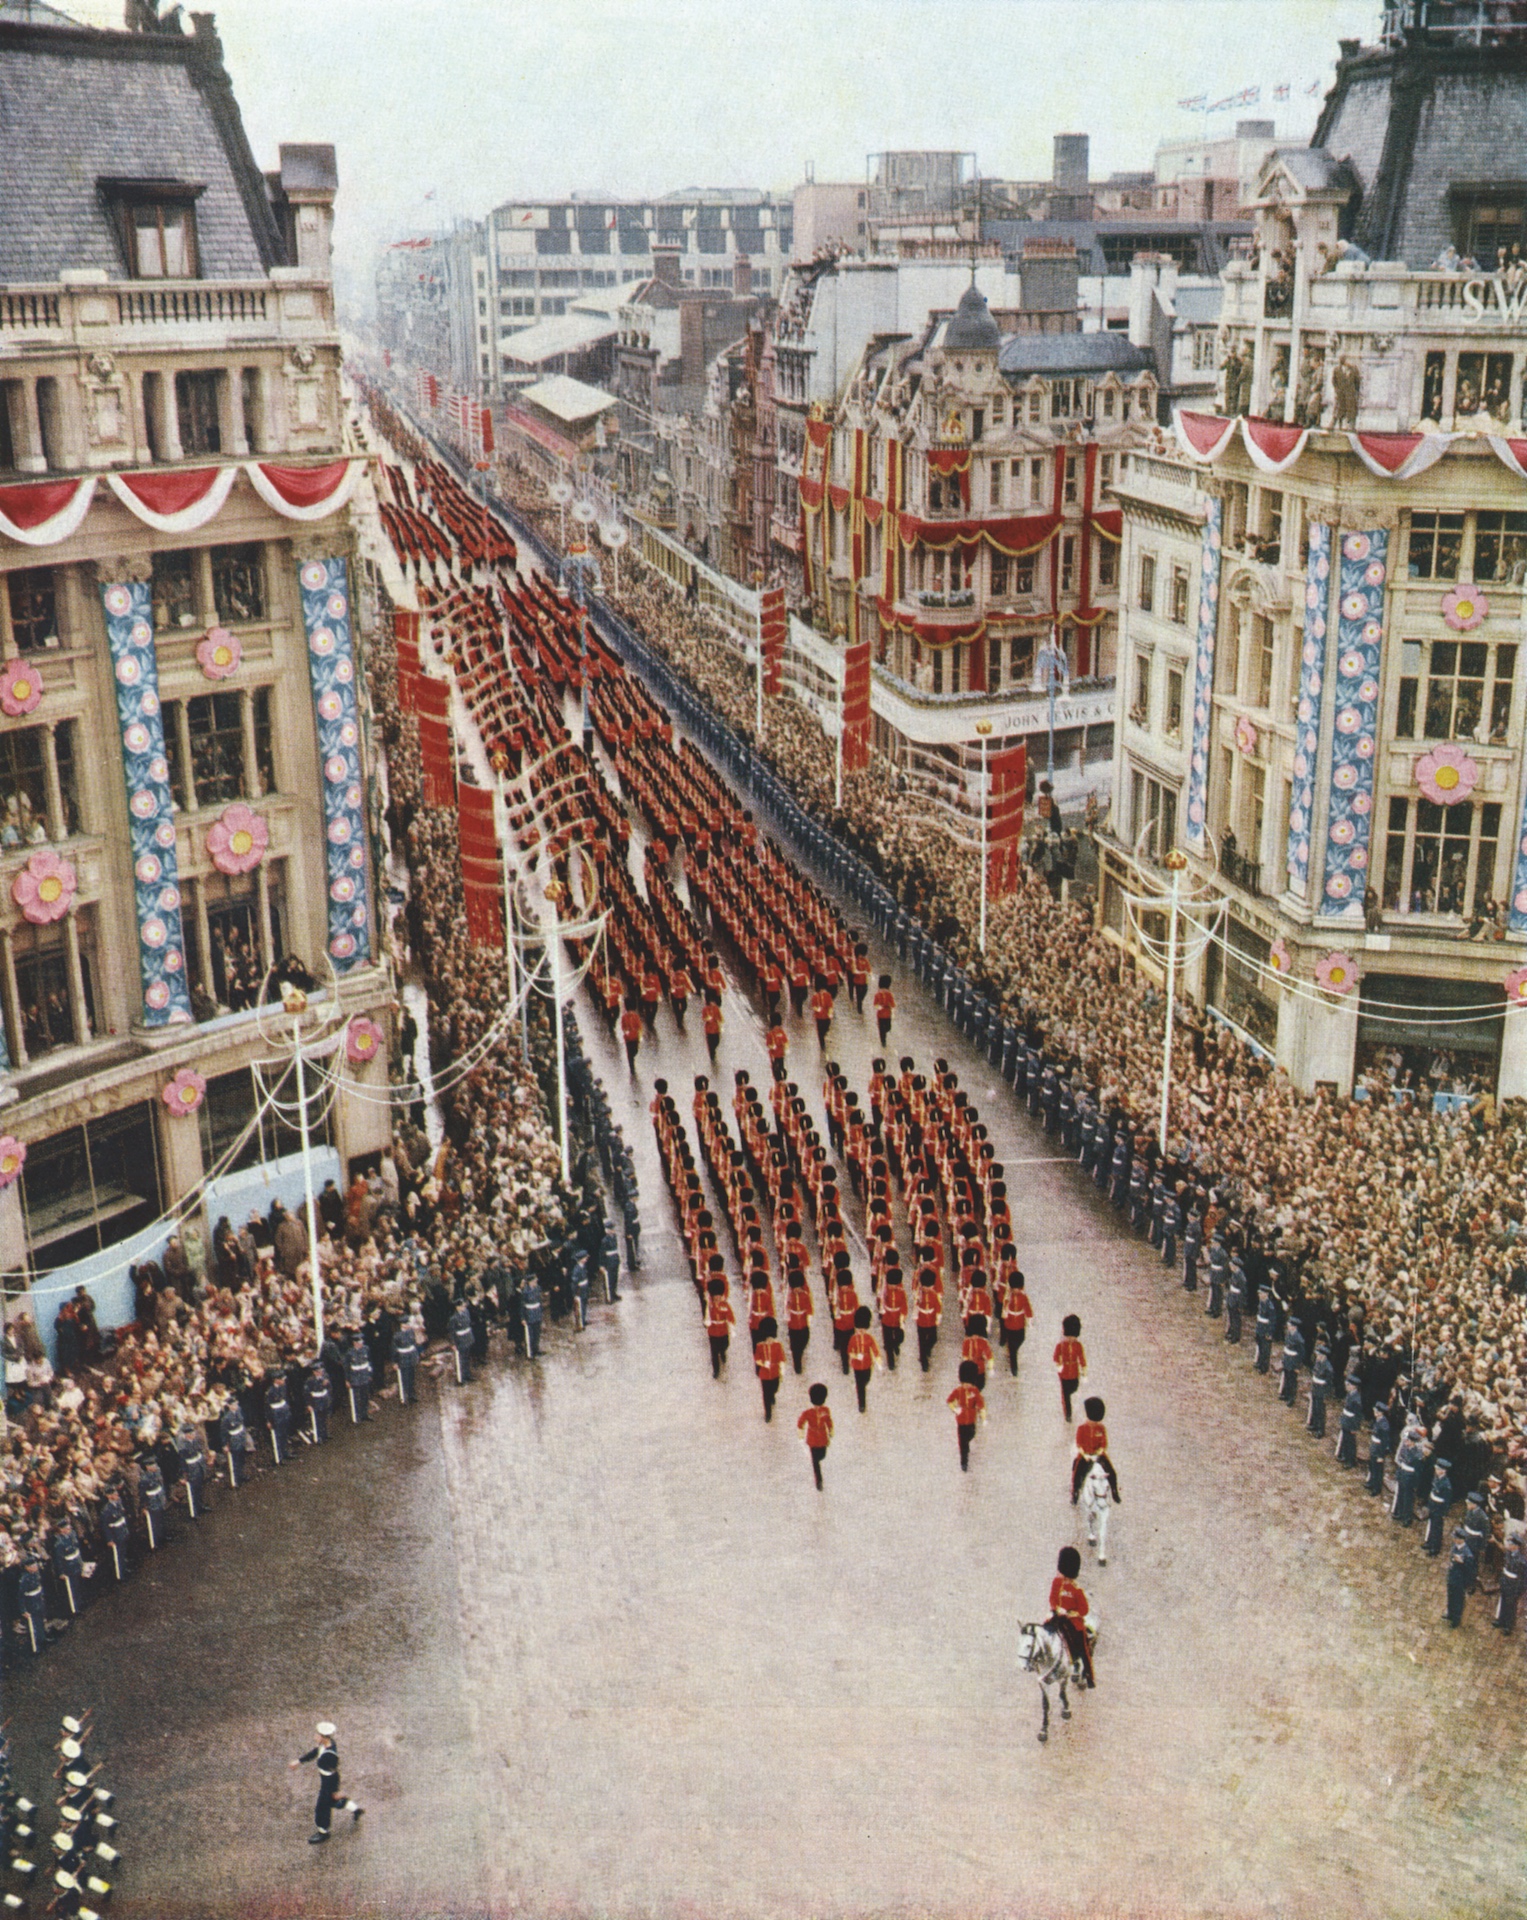 Queen Elizabeth II's Coronation procession, which stretched for three kilometers